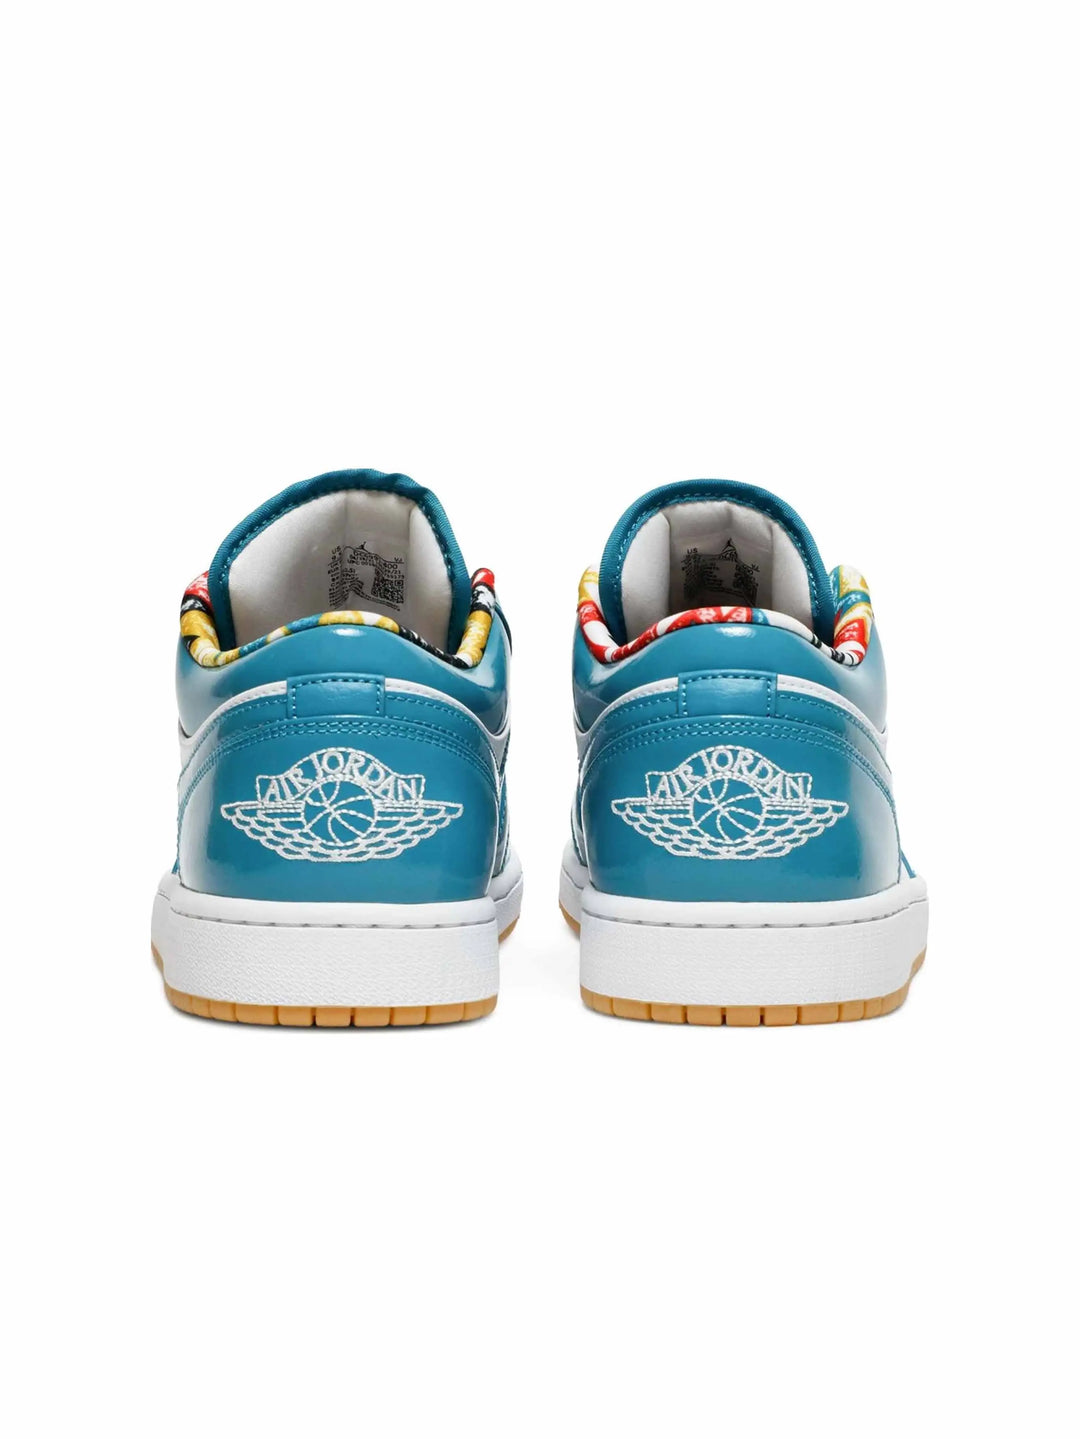 Nike Air Jordan 1 Low SE Barcelona Cyber Teal in Auckland, New Zealand - Shop name